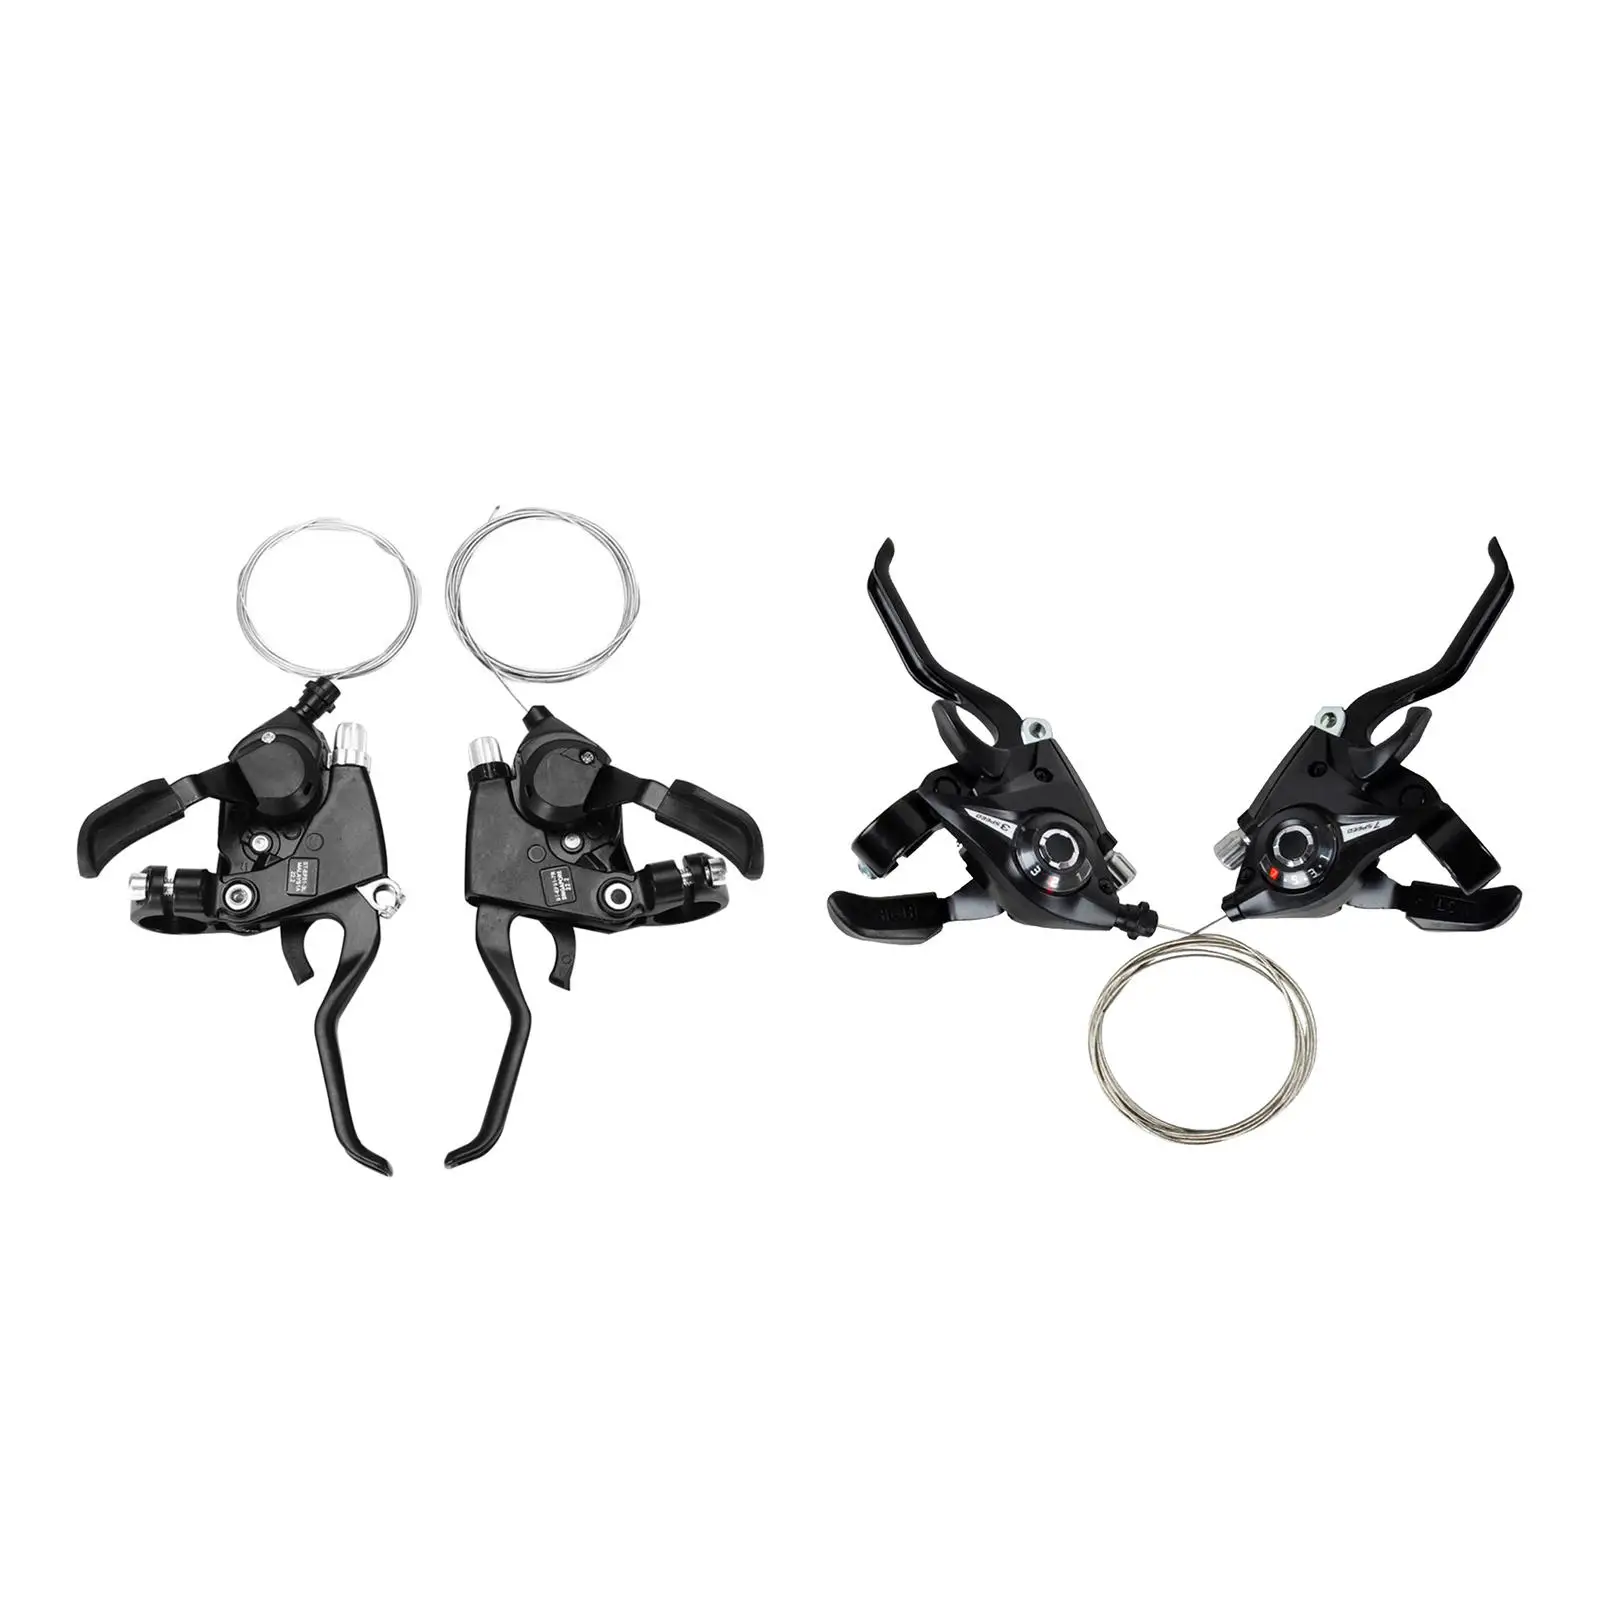 1 Pair  Brake Levers 3x7 / 8 21-24  ??er with Speedometer And V-Brake Cable for MTB, Road Bike,